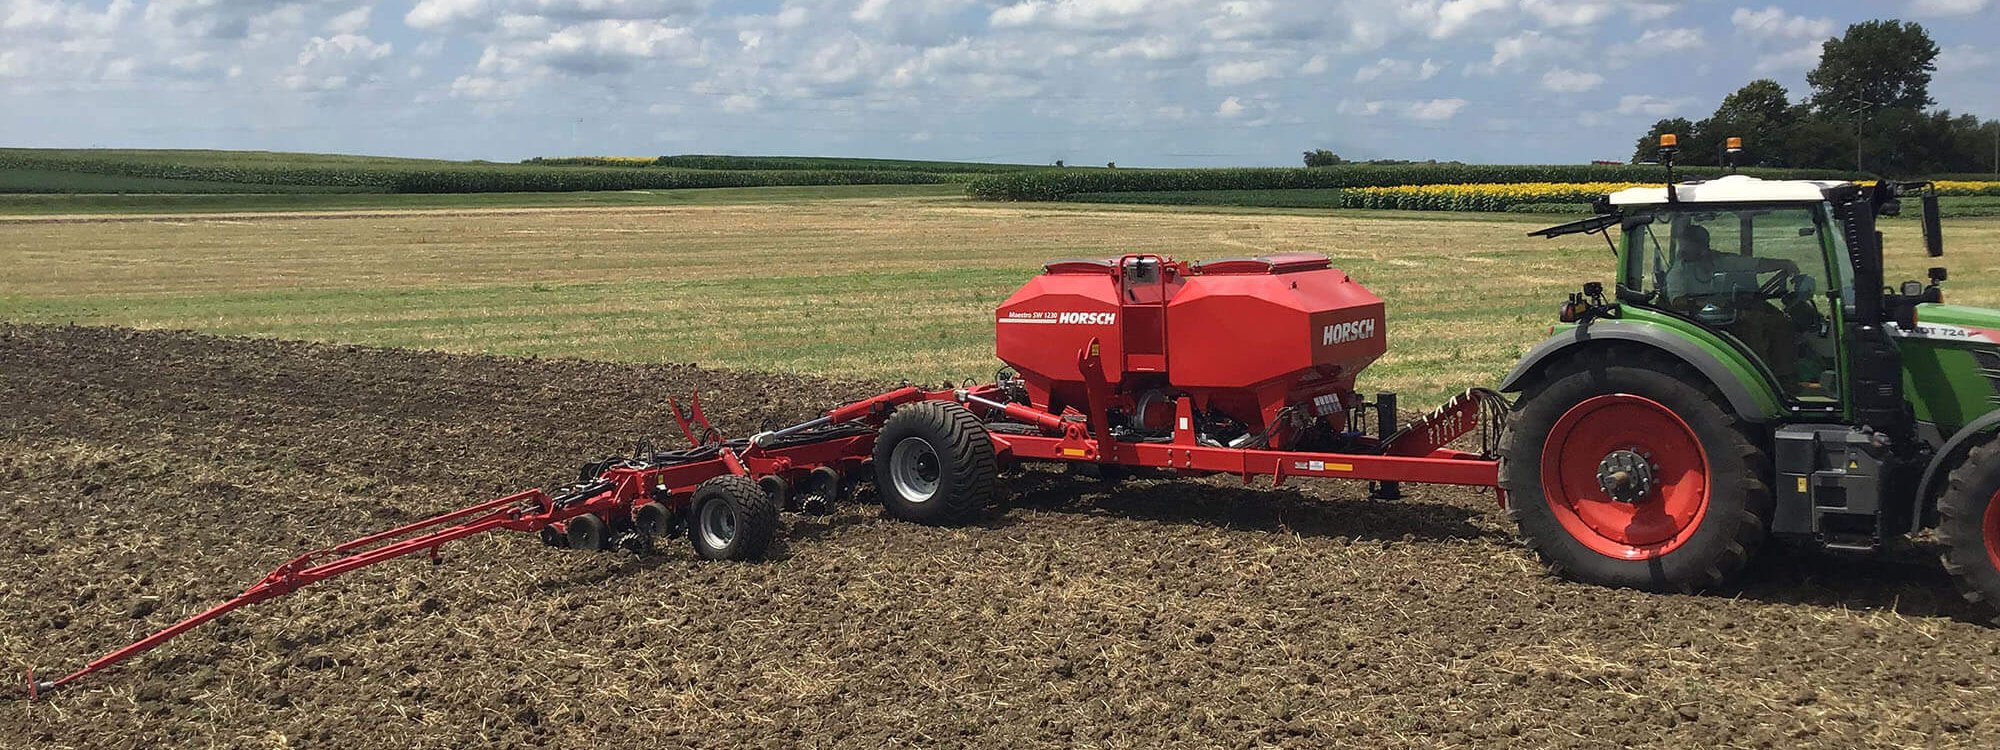 The Maestro row crop planter is the only planter on the market today with a common-sense approach in design that incorporates basic agronomic principals for securing maximum yield potentials.